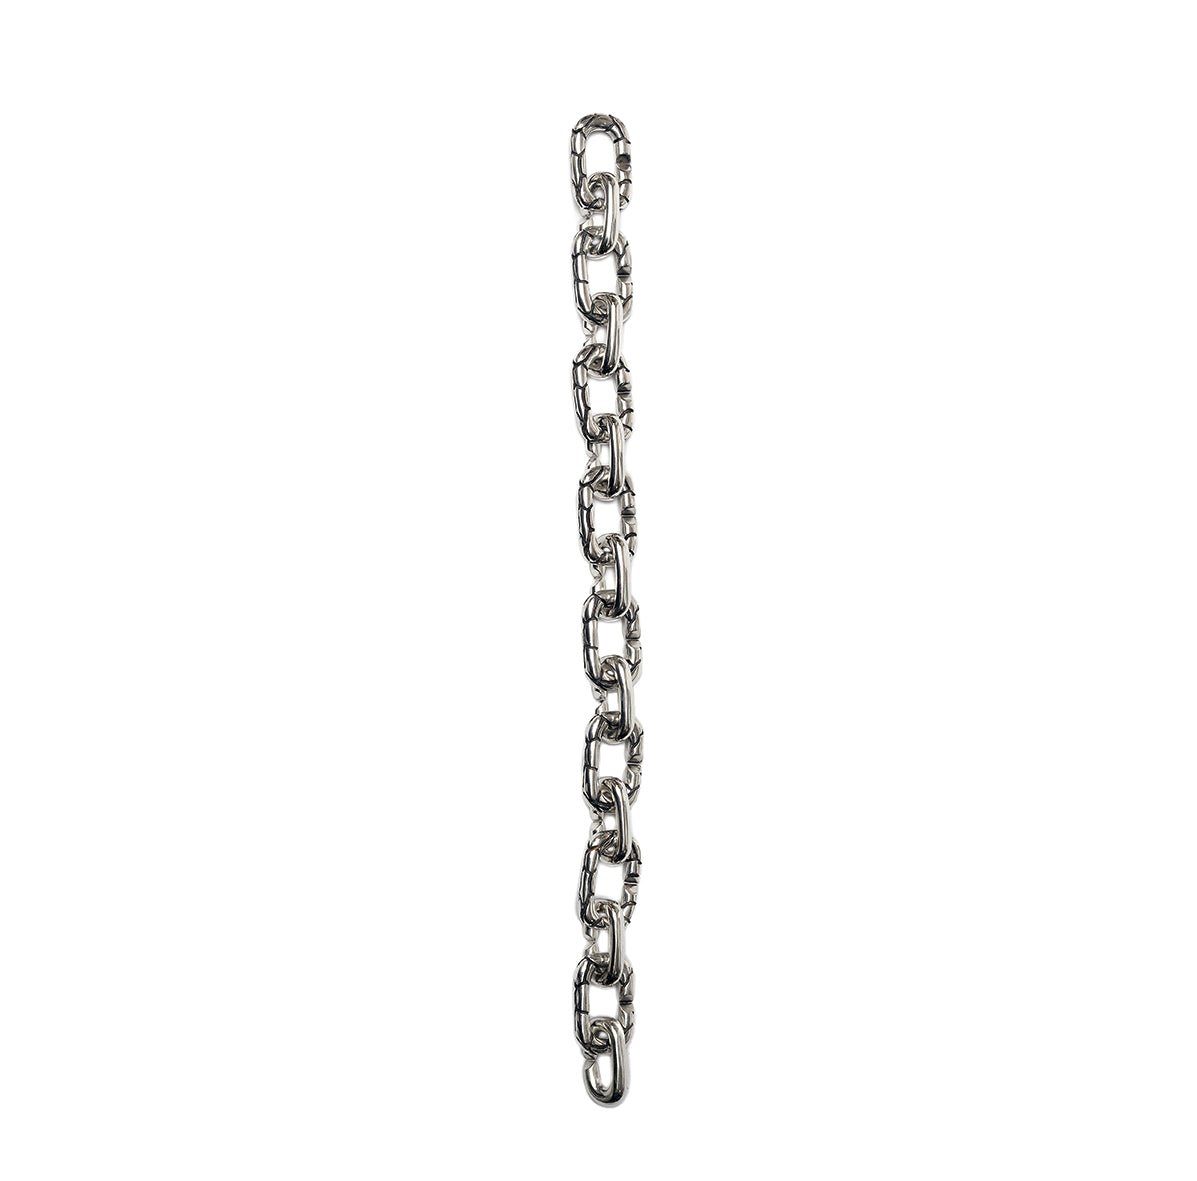 Continue - Sterling silver bracelet with thick chain combination - Avant Gardist